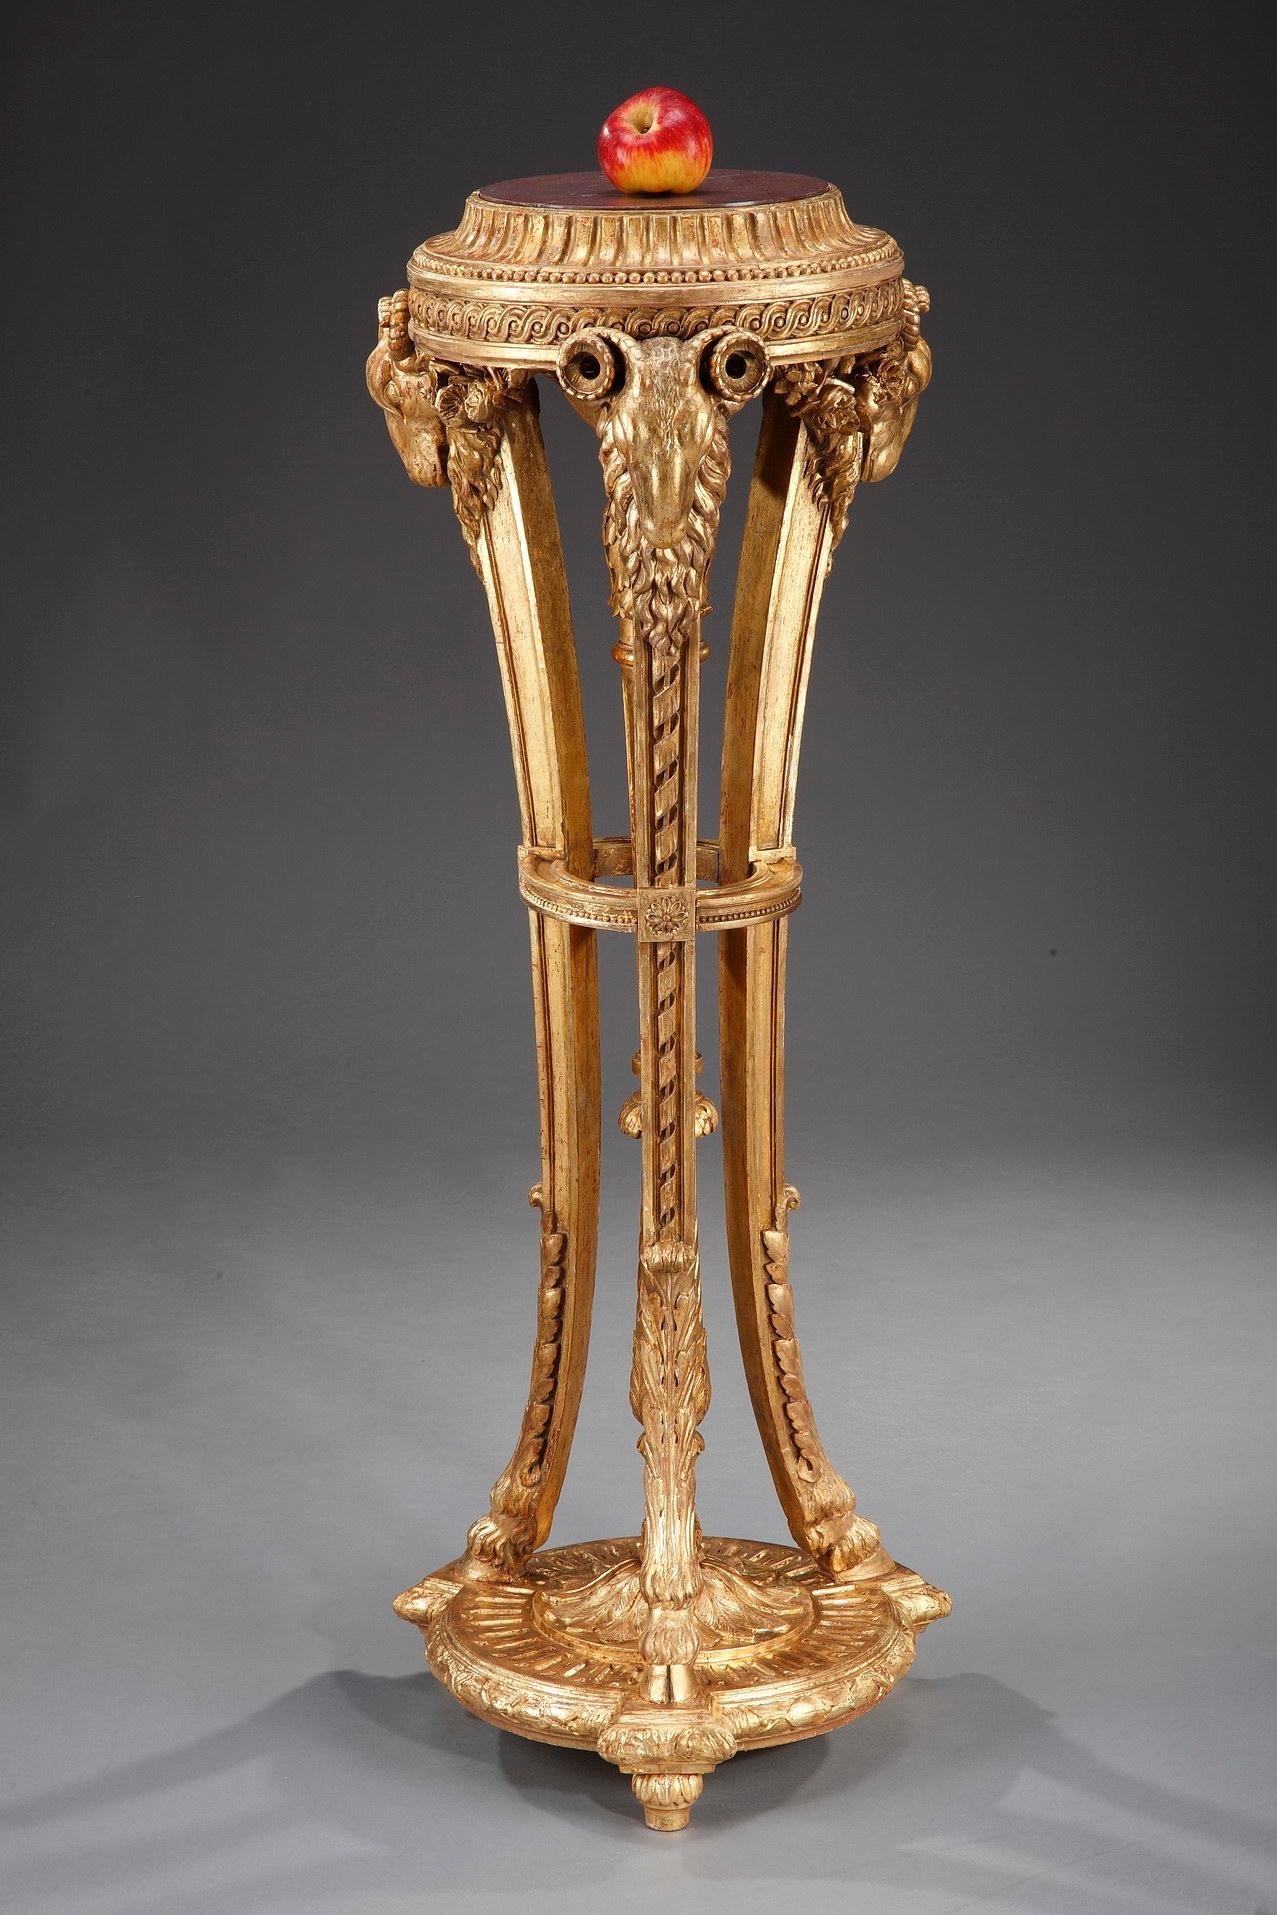 19th century neoclassical pedestal resting on three arched hoof's paw feet, above a round base. Crafted of giltwood, this intricately detailed fixure boasts rams' heads, garlands of flowers and acanthus leaves. The upper part with circular red